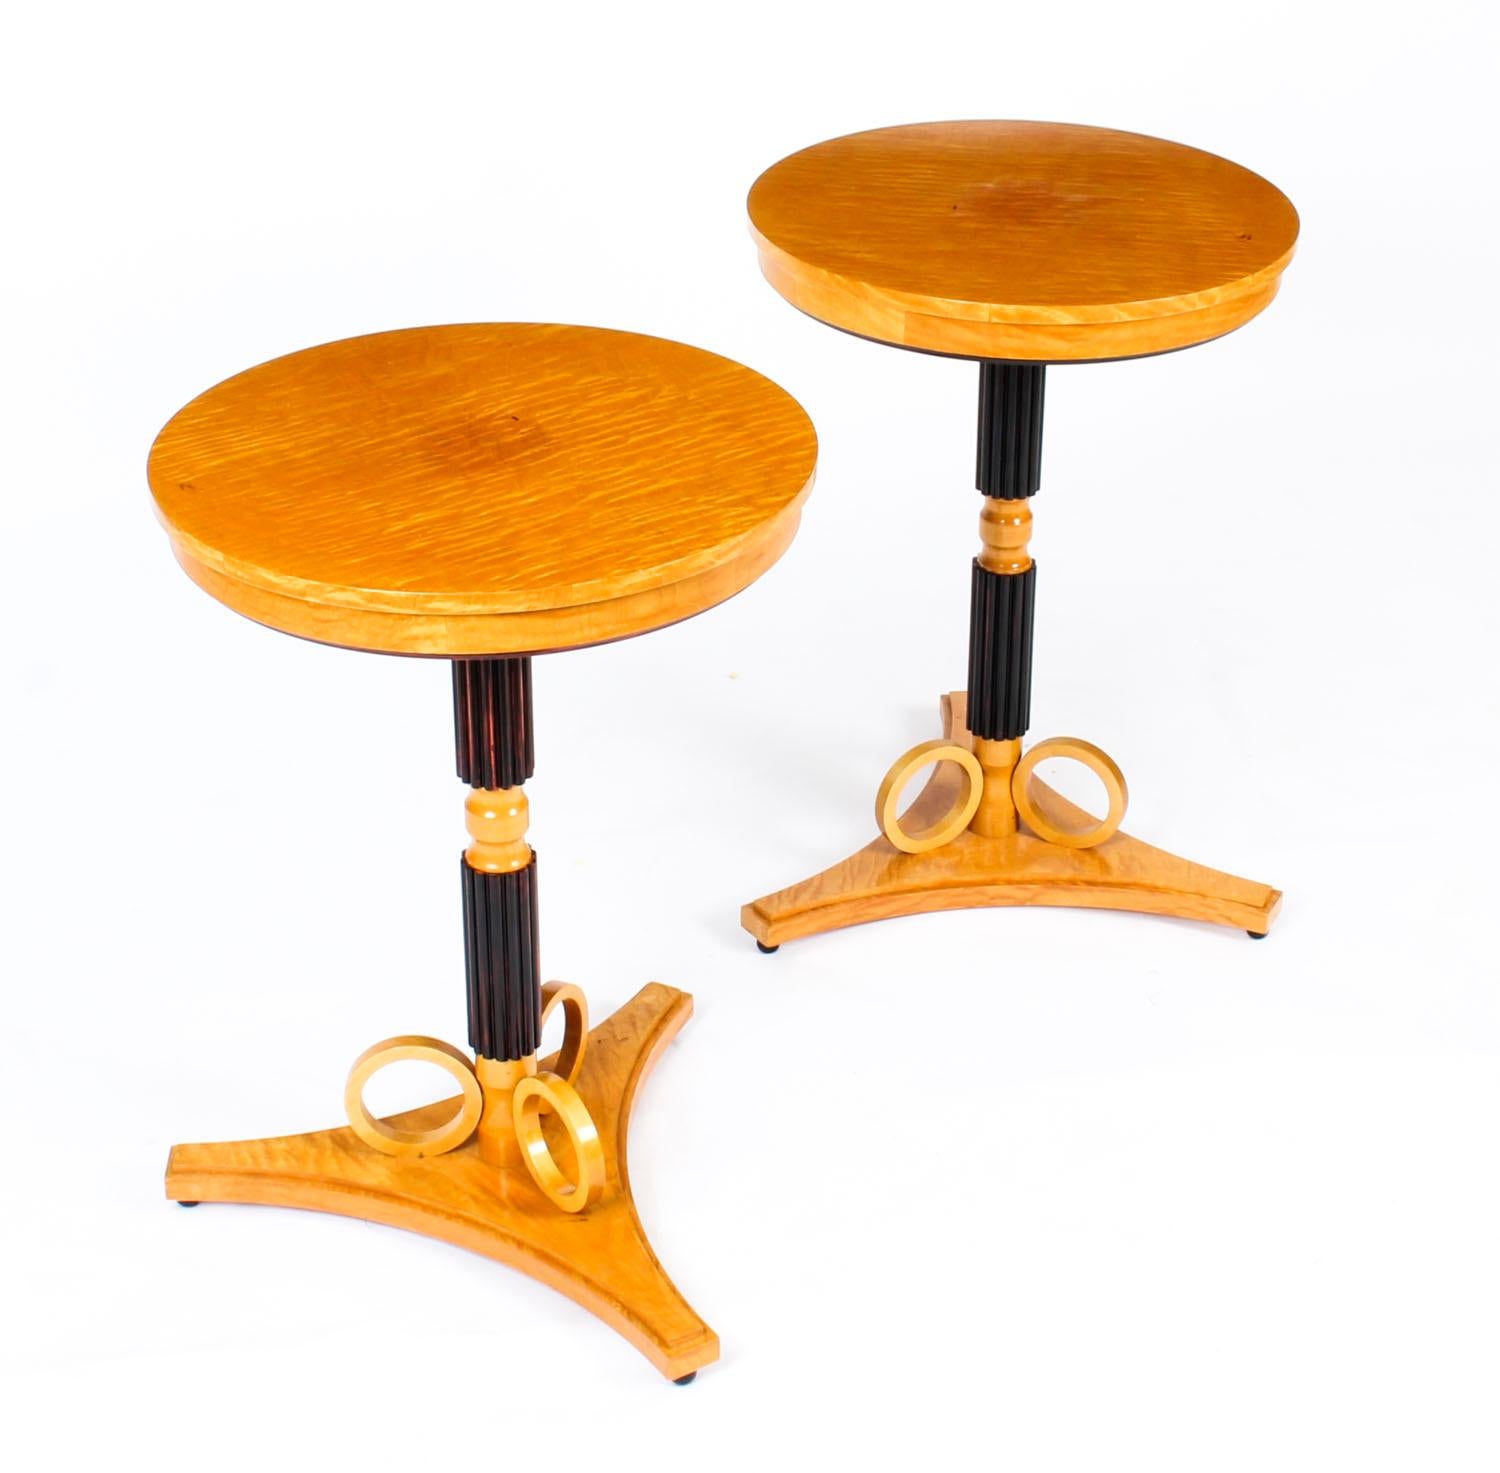 This is a stylish vintage pair of Swedish Biedermeier Karelian birch and ebonized side tables, mid-20th century in date.

The tables feature round tops on ebonized fluted column pedestals standing on shaped tripod platform bases raised on ebonized